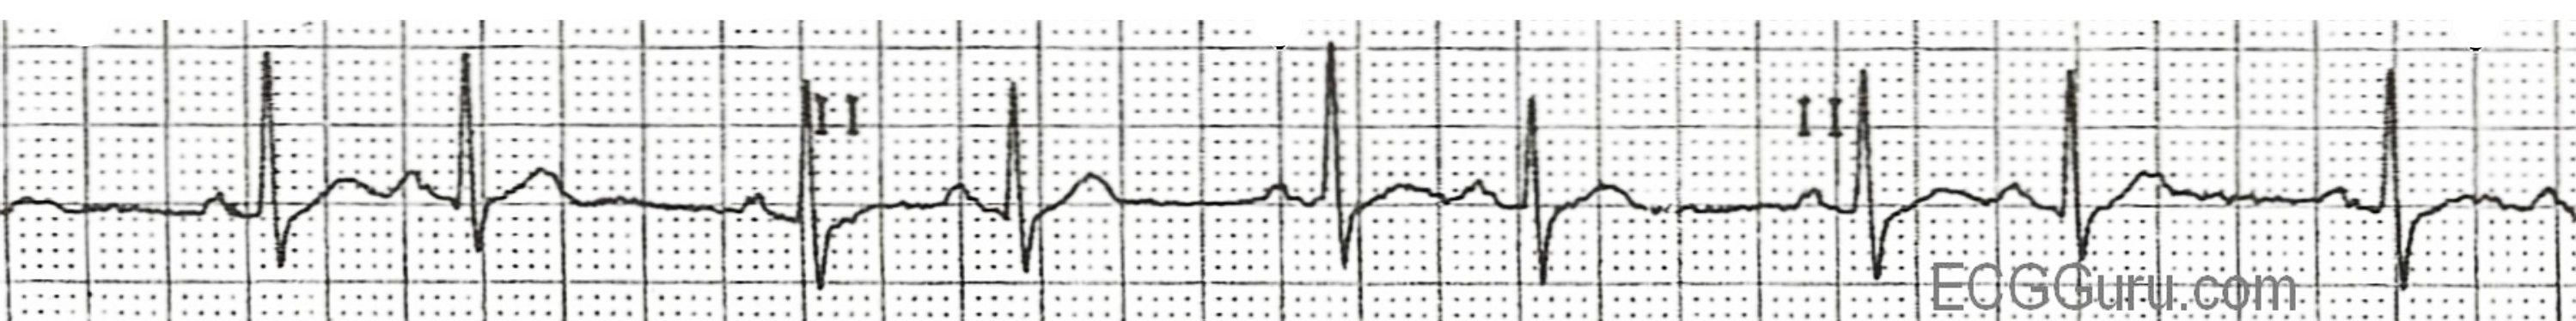 Normal QRS complex is rapidly followed by a premature atrial contraction which leads to another QRS complex. These two beats (bigemenie) are followed by a prolonged gap which is followed by another normal P-wave and QRS complex which again is followed by an abnormal premature atrial contraction (PAC) instigating another QRS complex. This process is repeated resulting in two QRS complexes clustered together all separated by prolonged gaps.